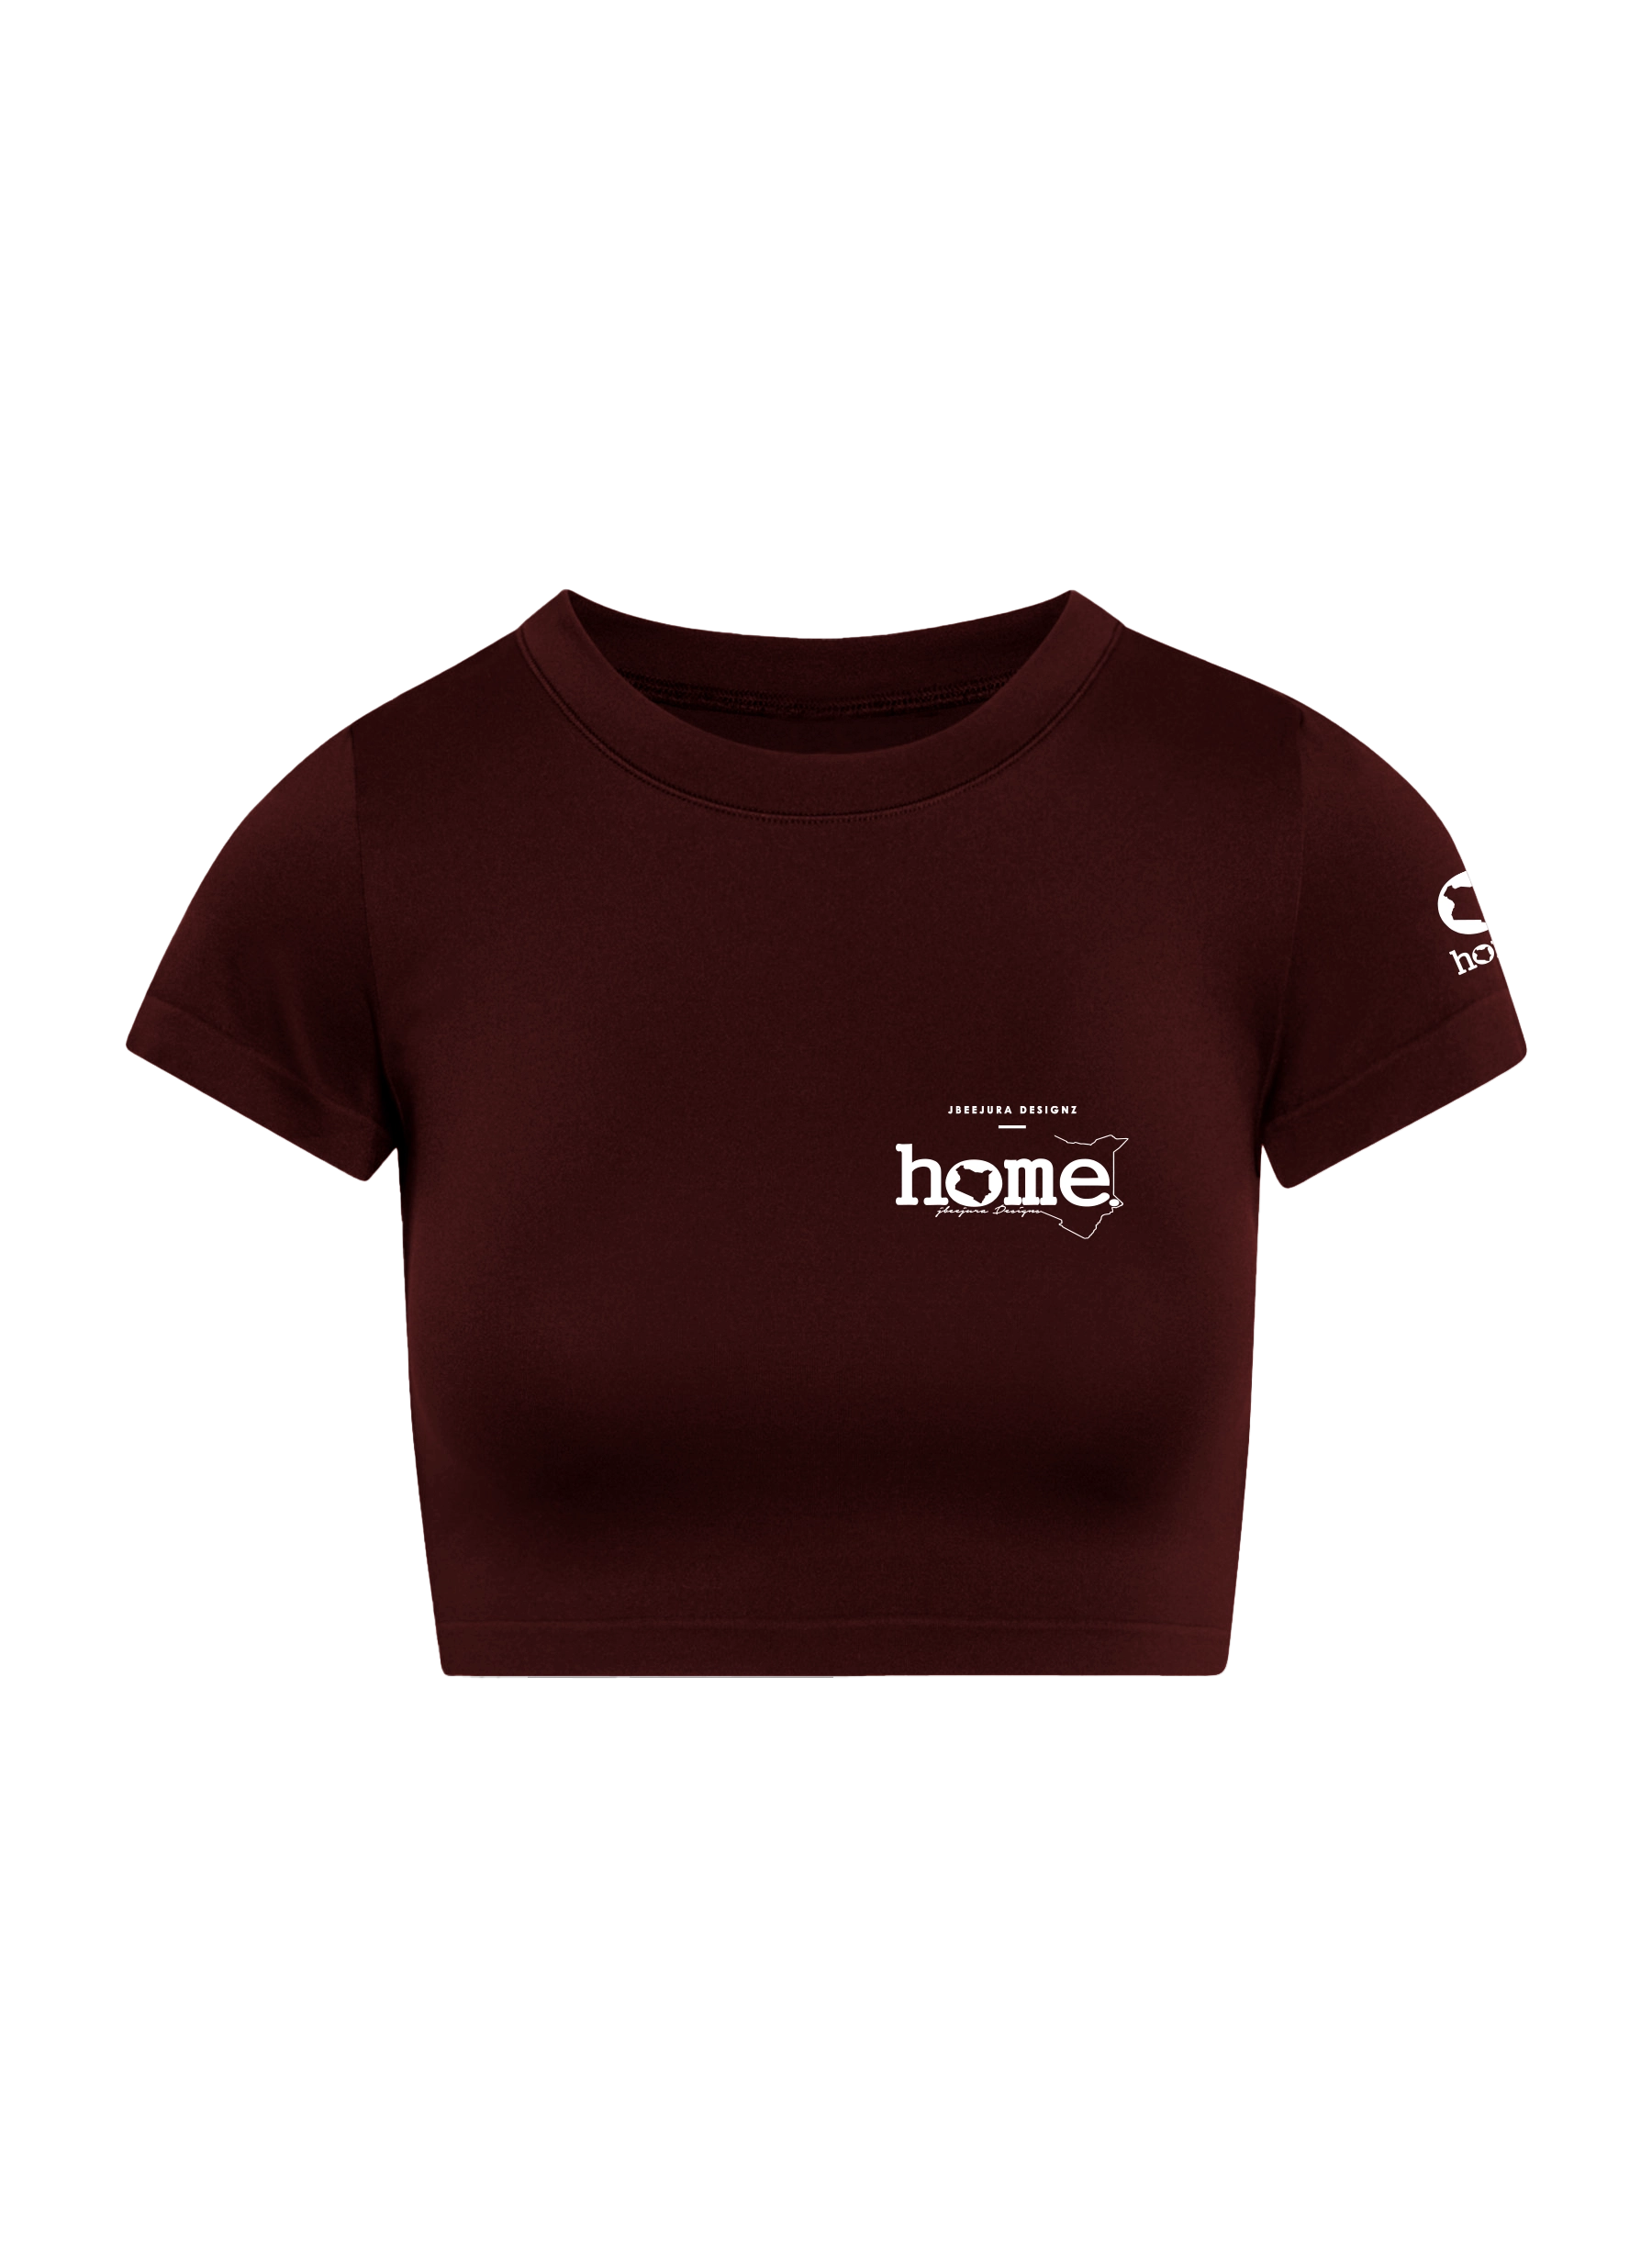 home_254 SHORT SLEEVED MAROON CROPPED ARIA TEE WITH A WHITE 3D WORDS PRINT 